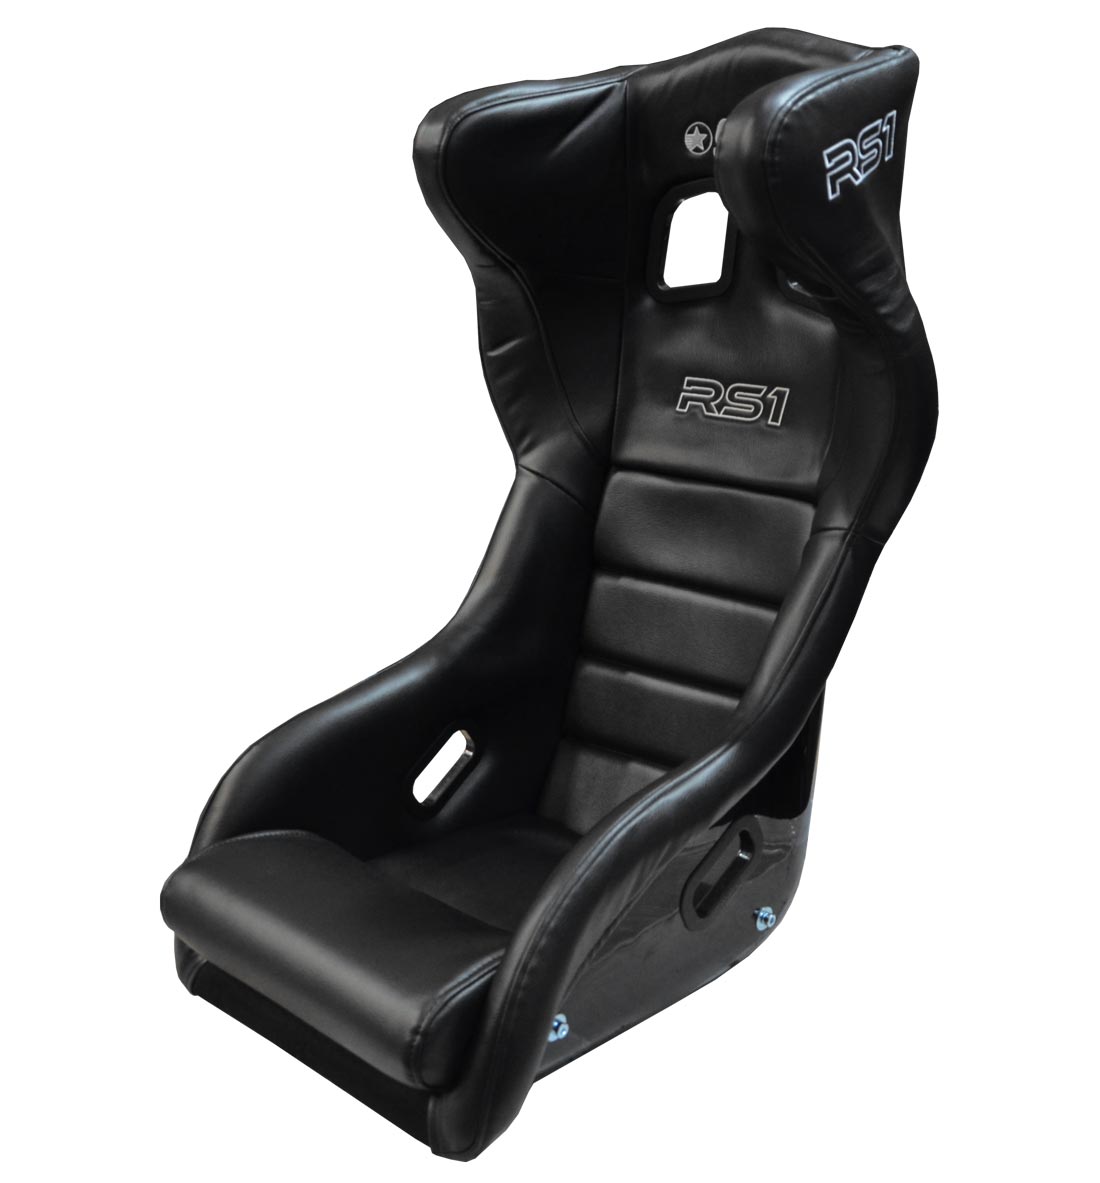 STR 'RS1' FIA Approved Race Seat - 2029 Black PVC Leather